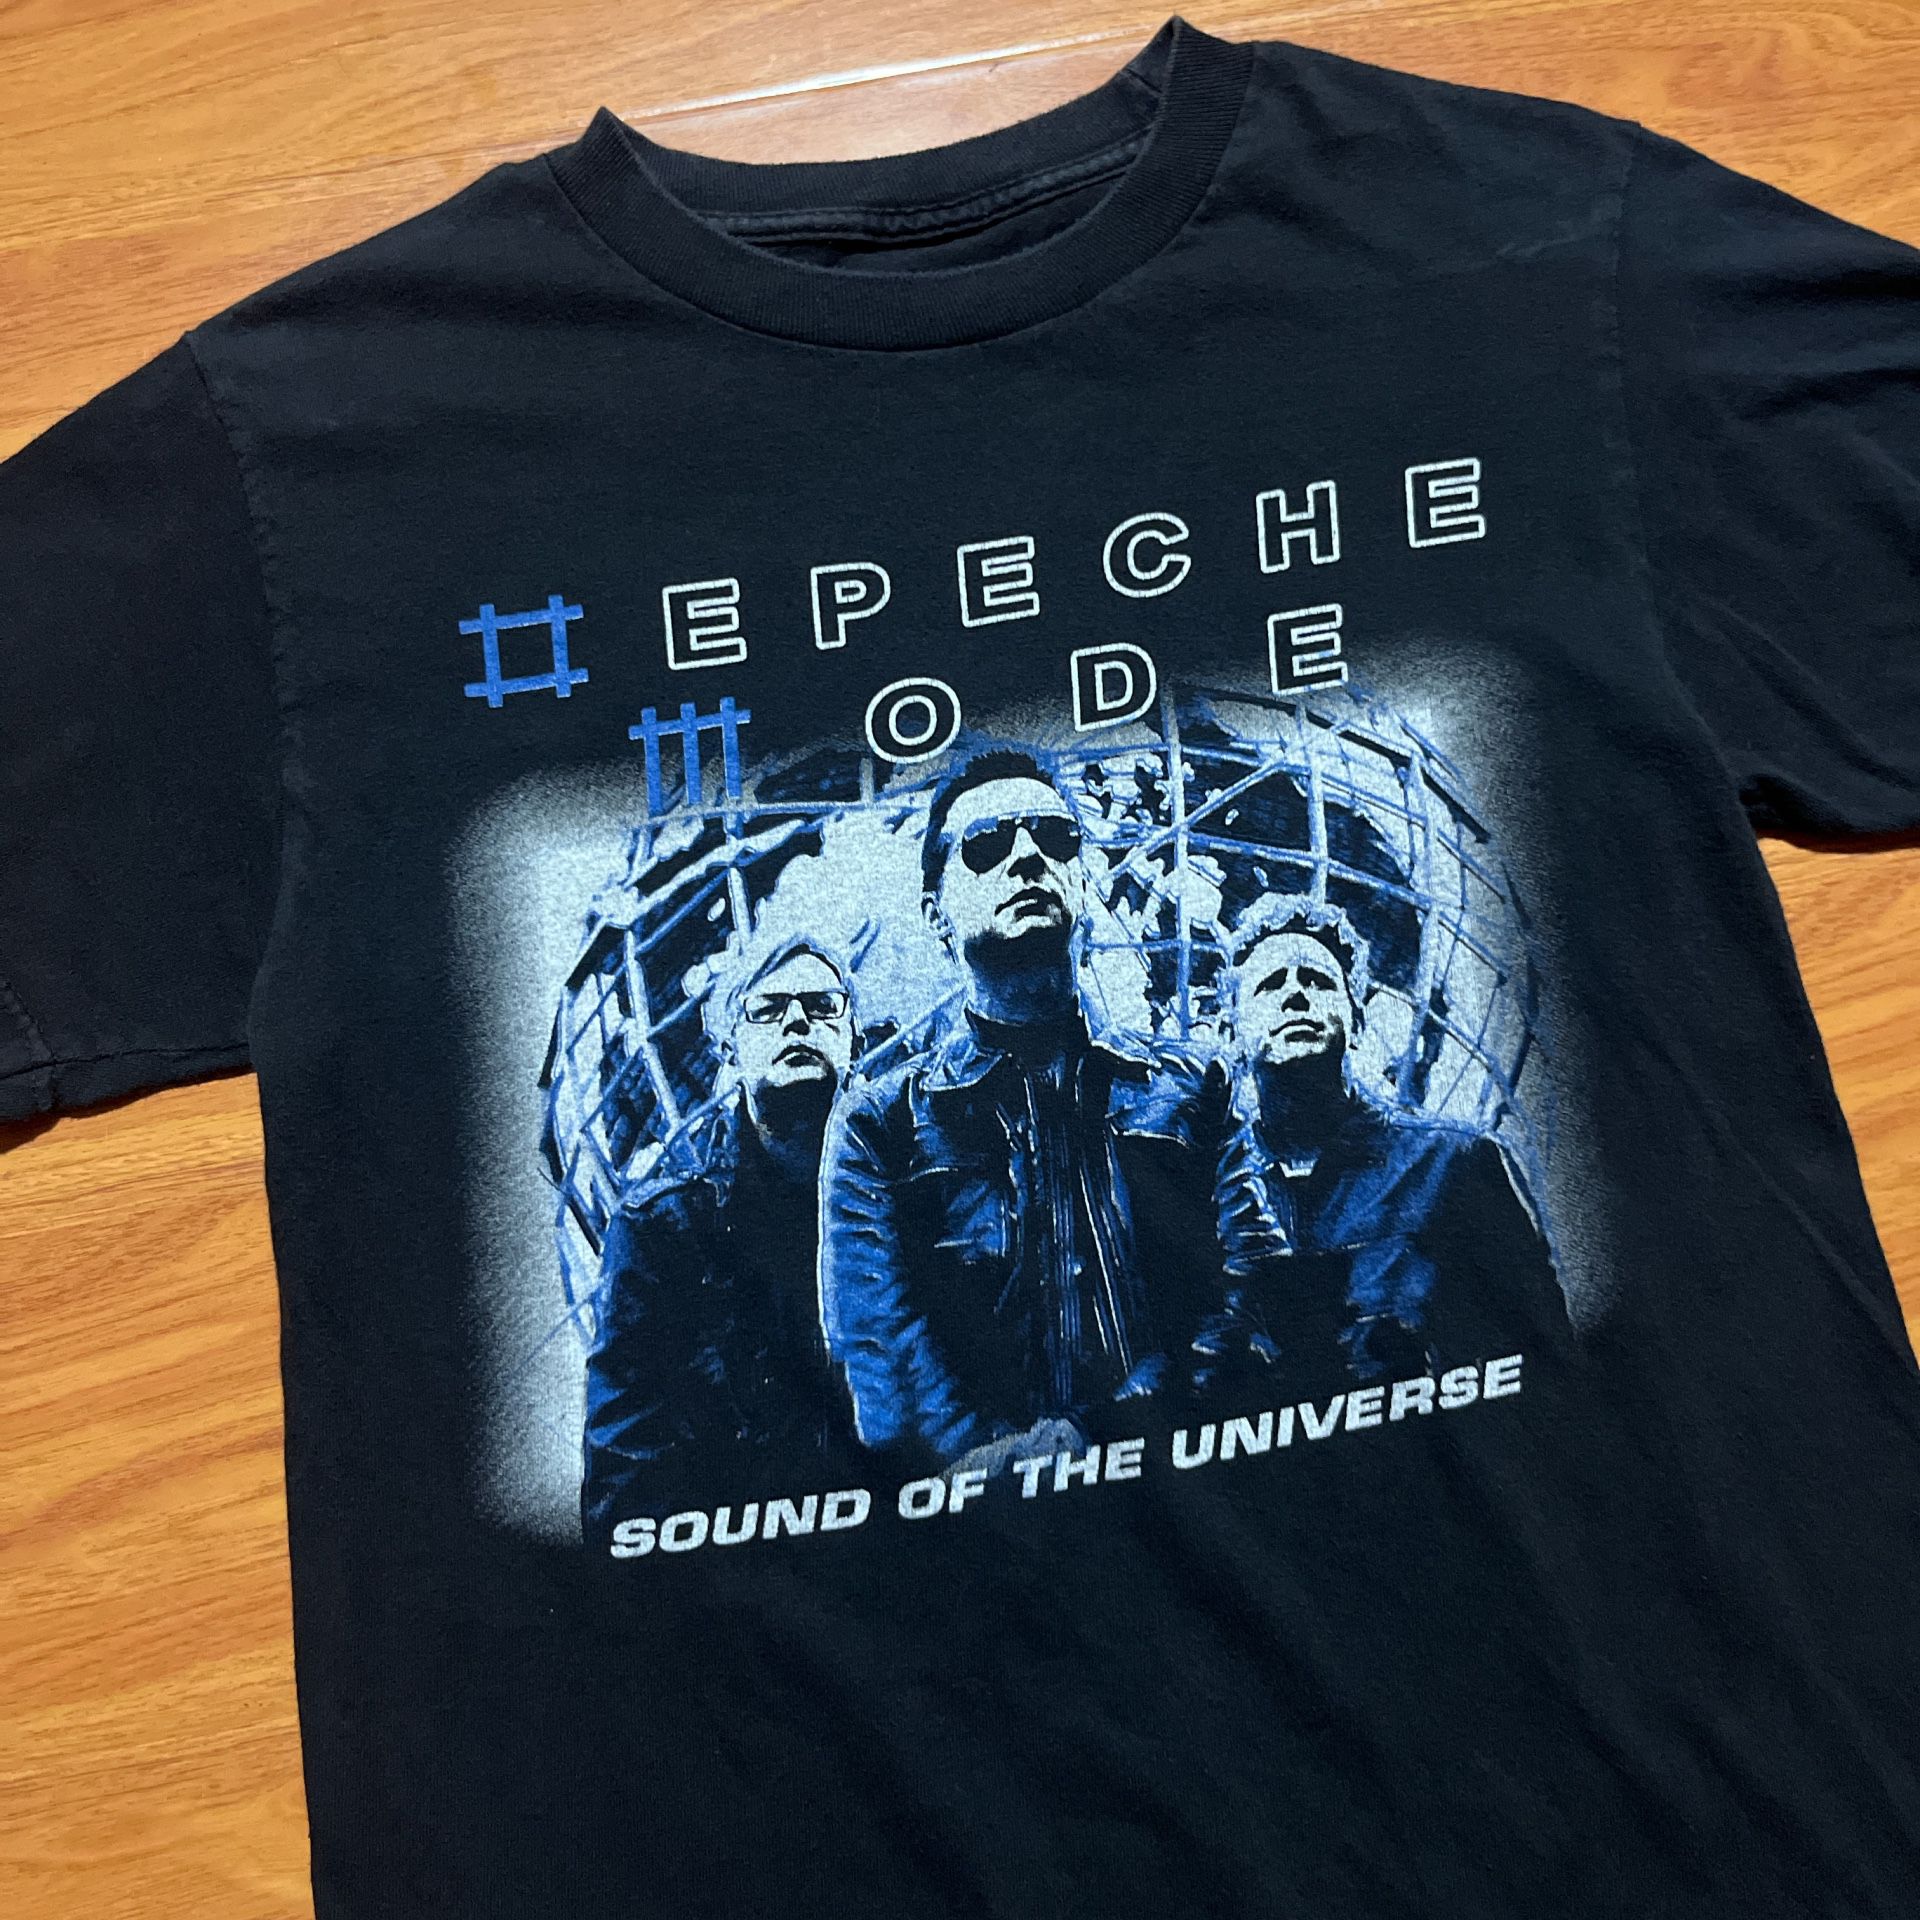 Vintage 2009 Depeche Mode Sound of the universe Tshirt  Size S 